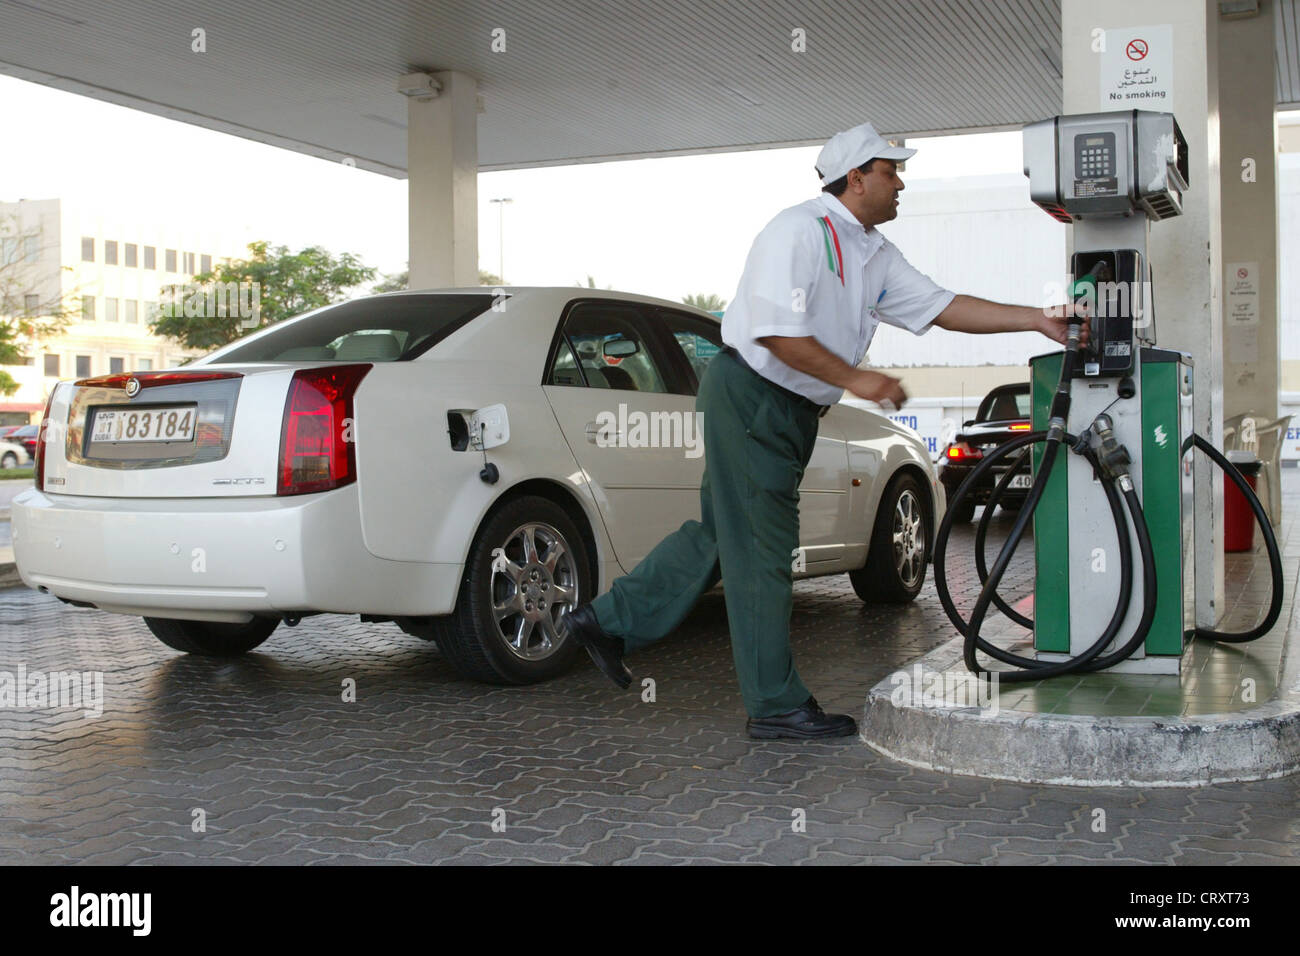 Attendant refueling a car at a gas station, Dubai Stock Photo